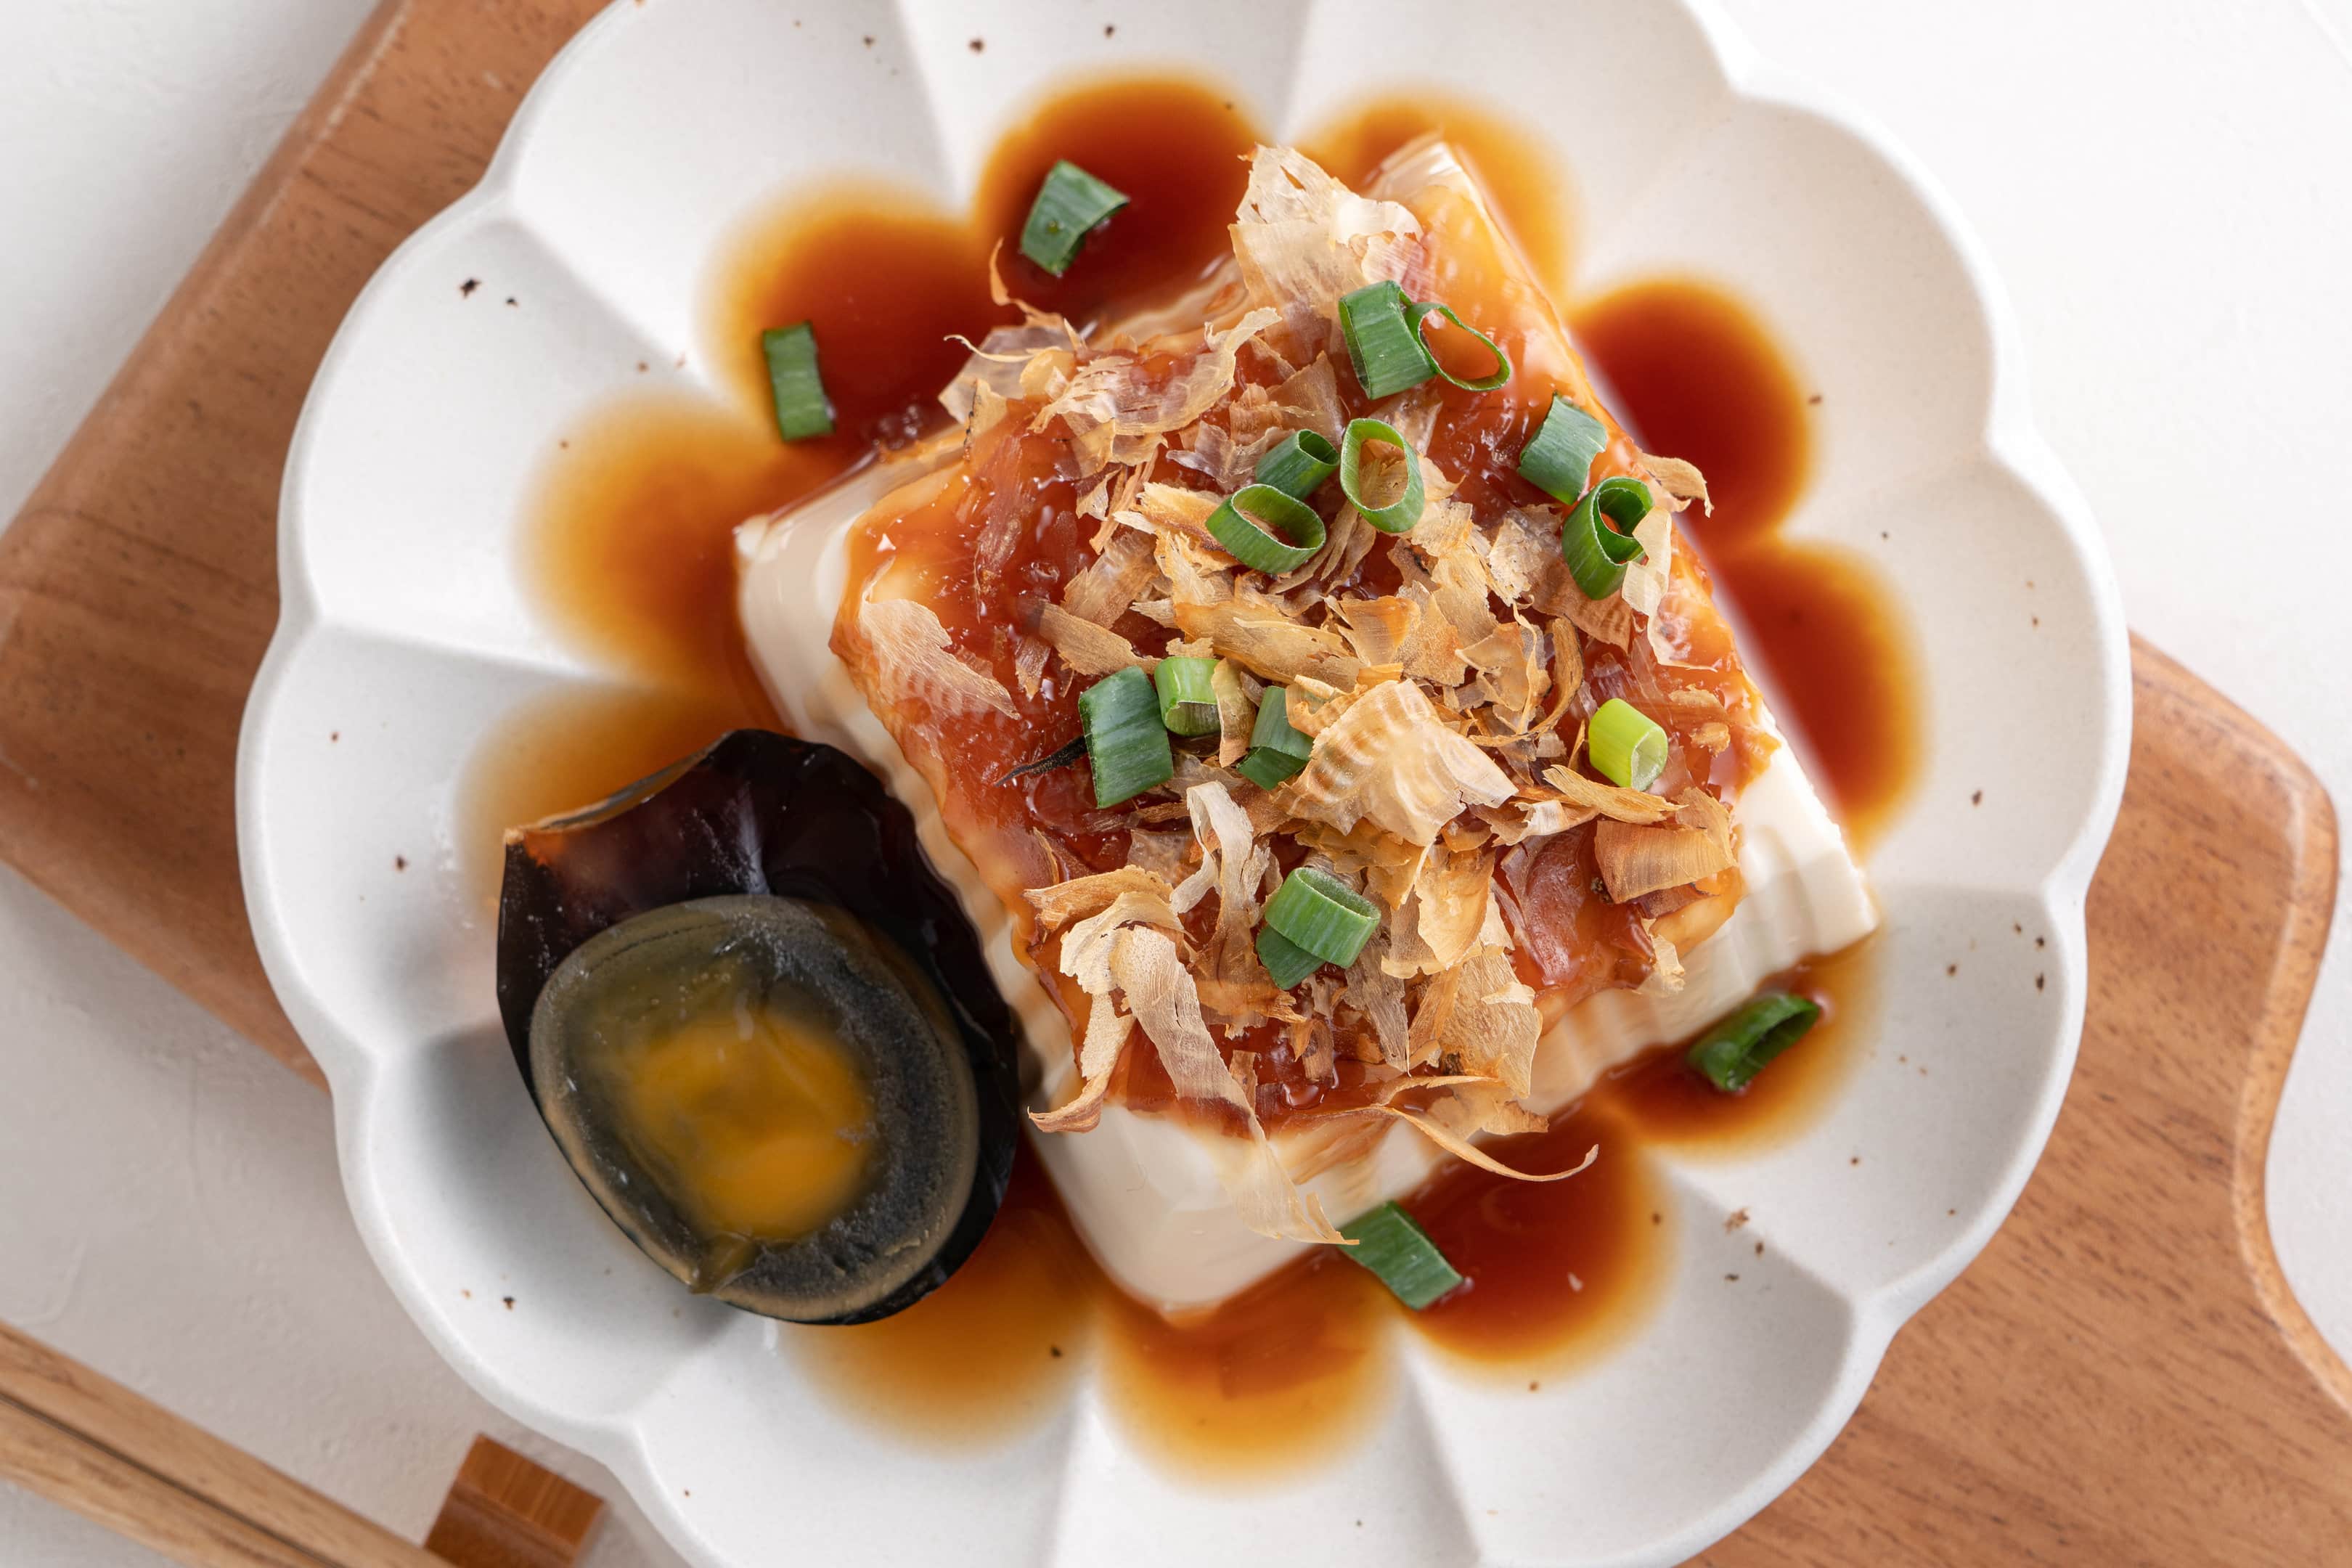 Delicious silken tofu recipe with soy sauce bonito flakes topping